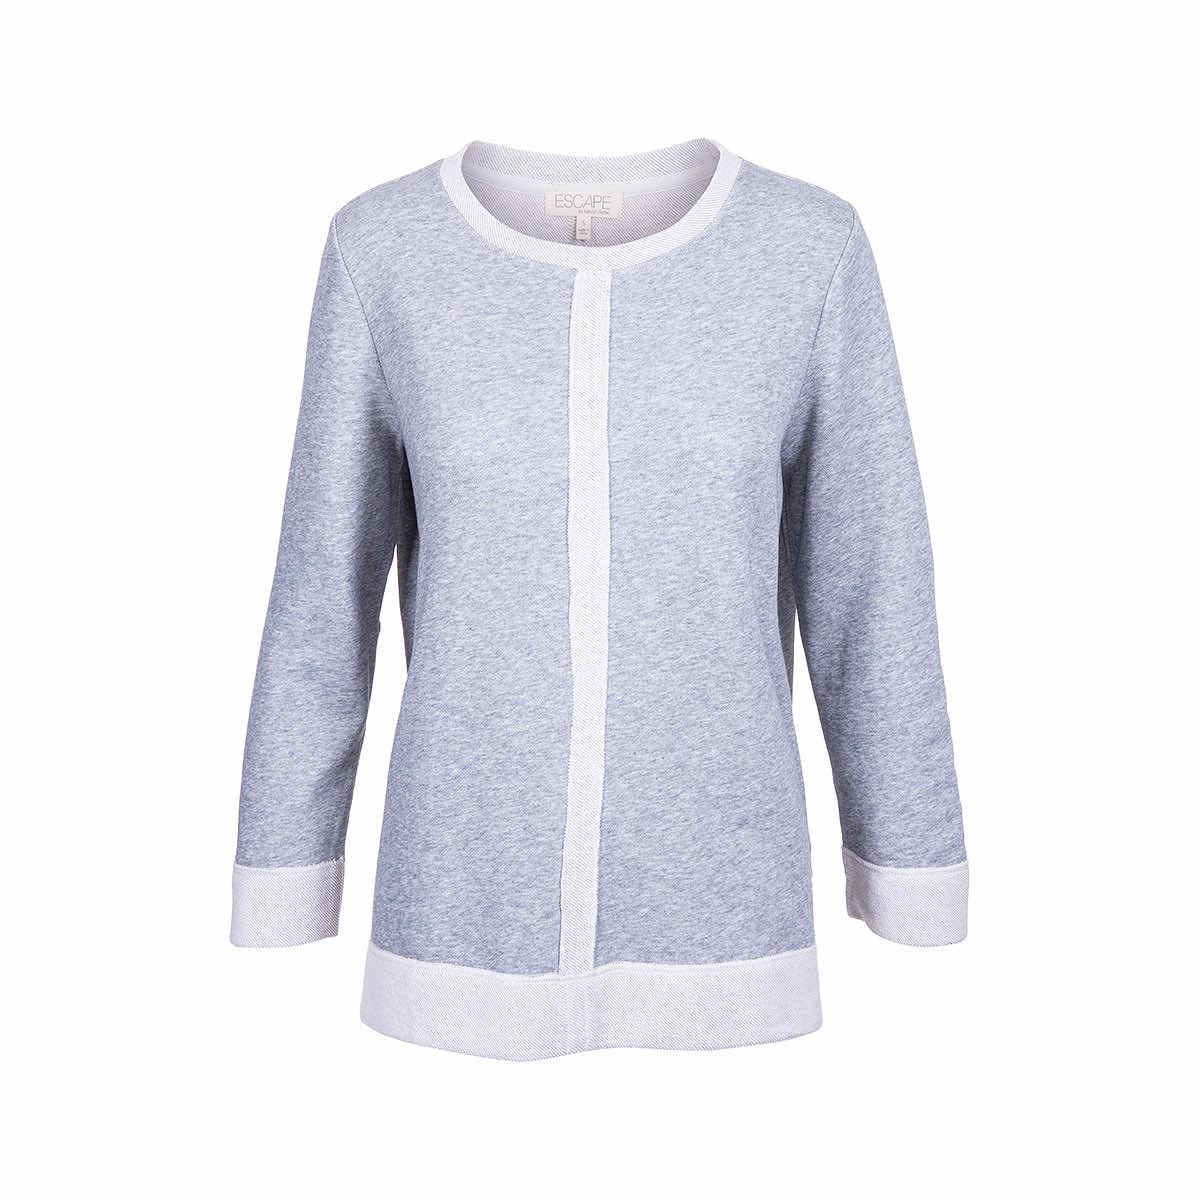  Women's French Terry Raw Edge Pullover Top